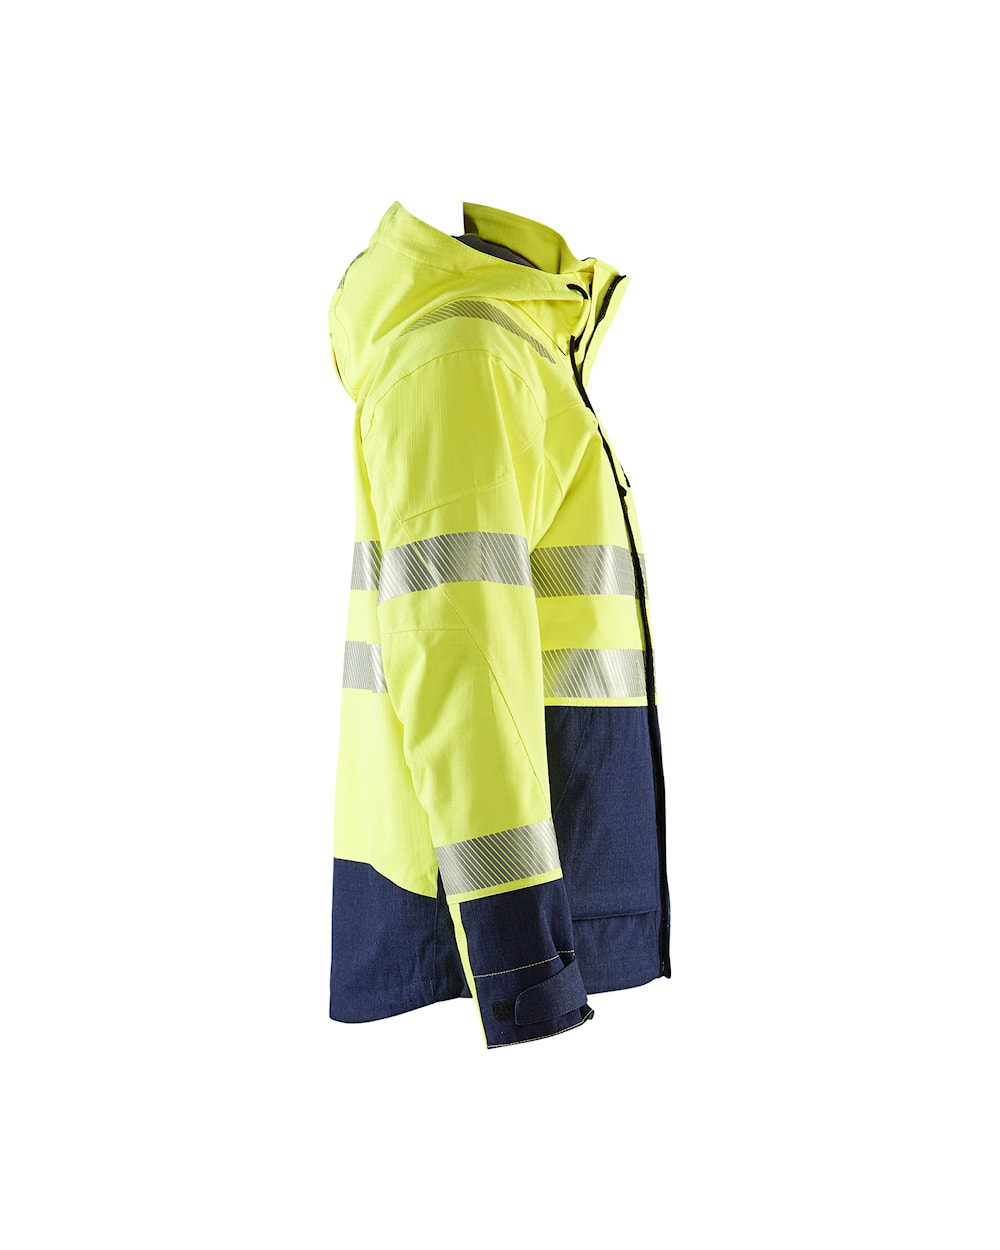 Blaklader 4786 Multinorm Fire Resistant Shell Jacket from Columbia Safety